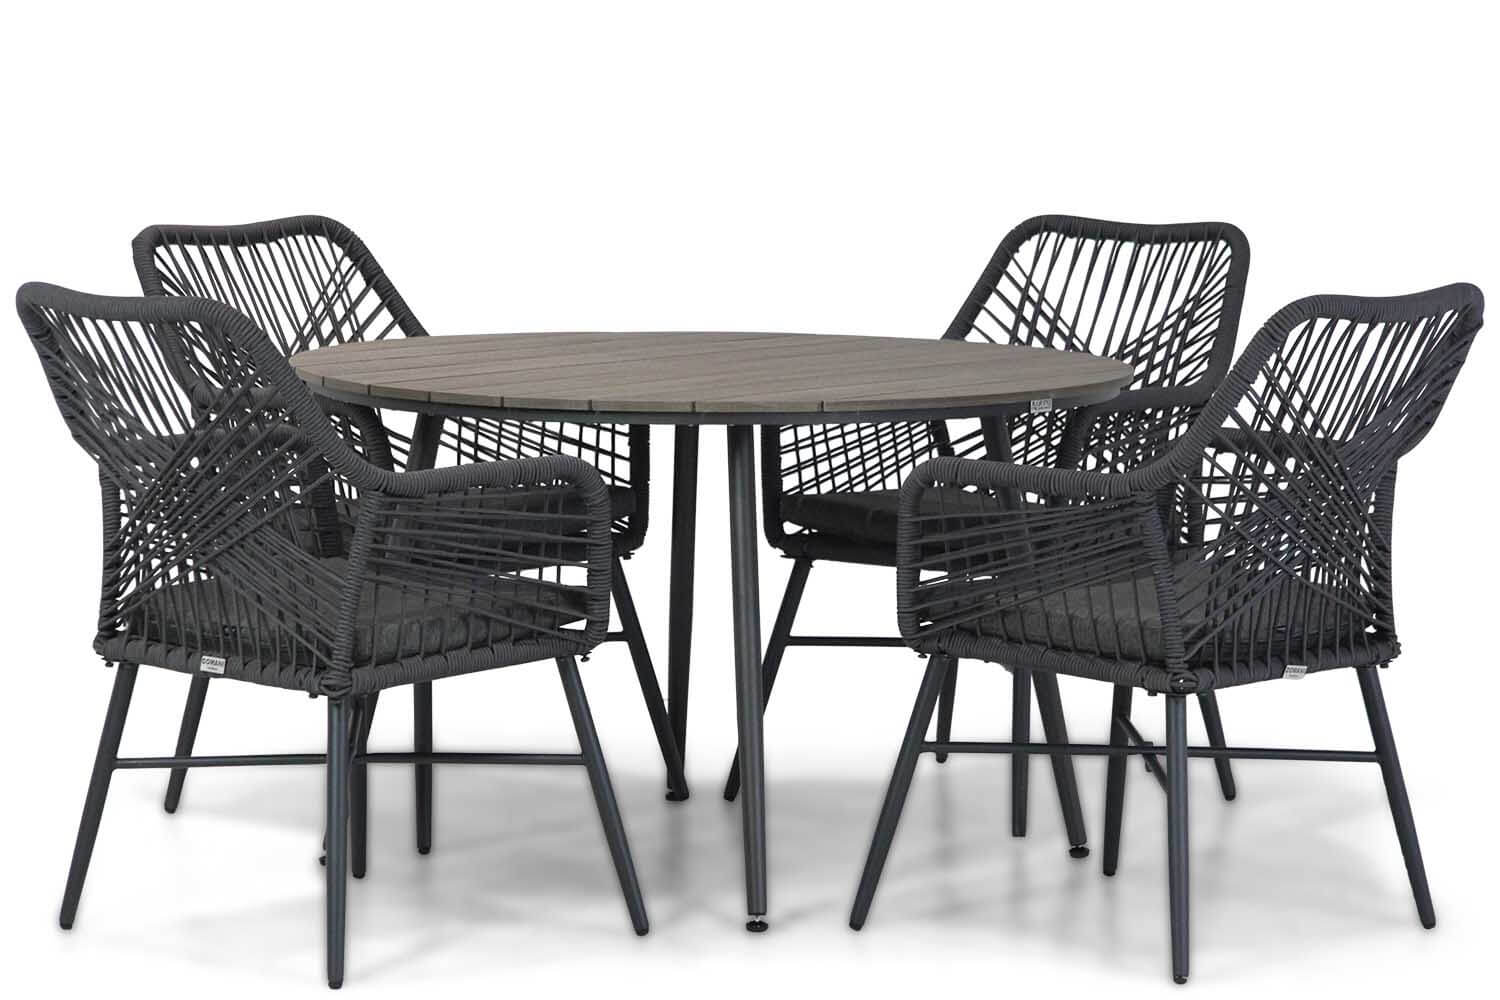 tuinset forisantra matalerond125 5 delig - Domani Foris/Matale 125 cm rond dining tuinset 5-delig